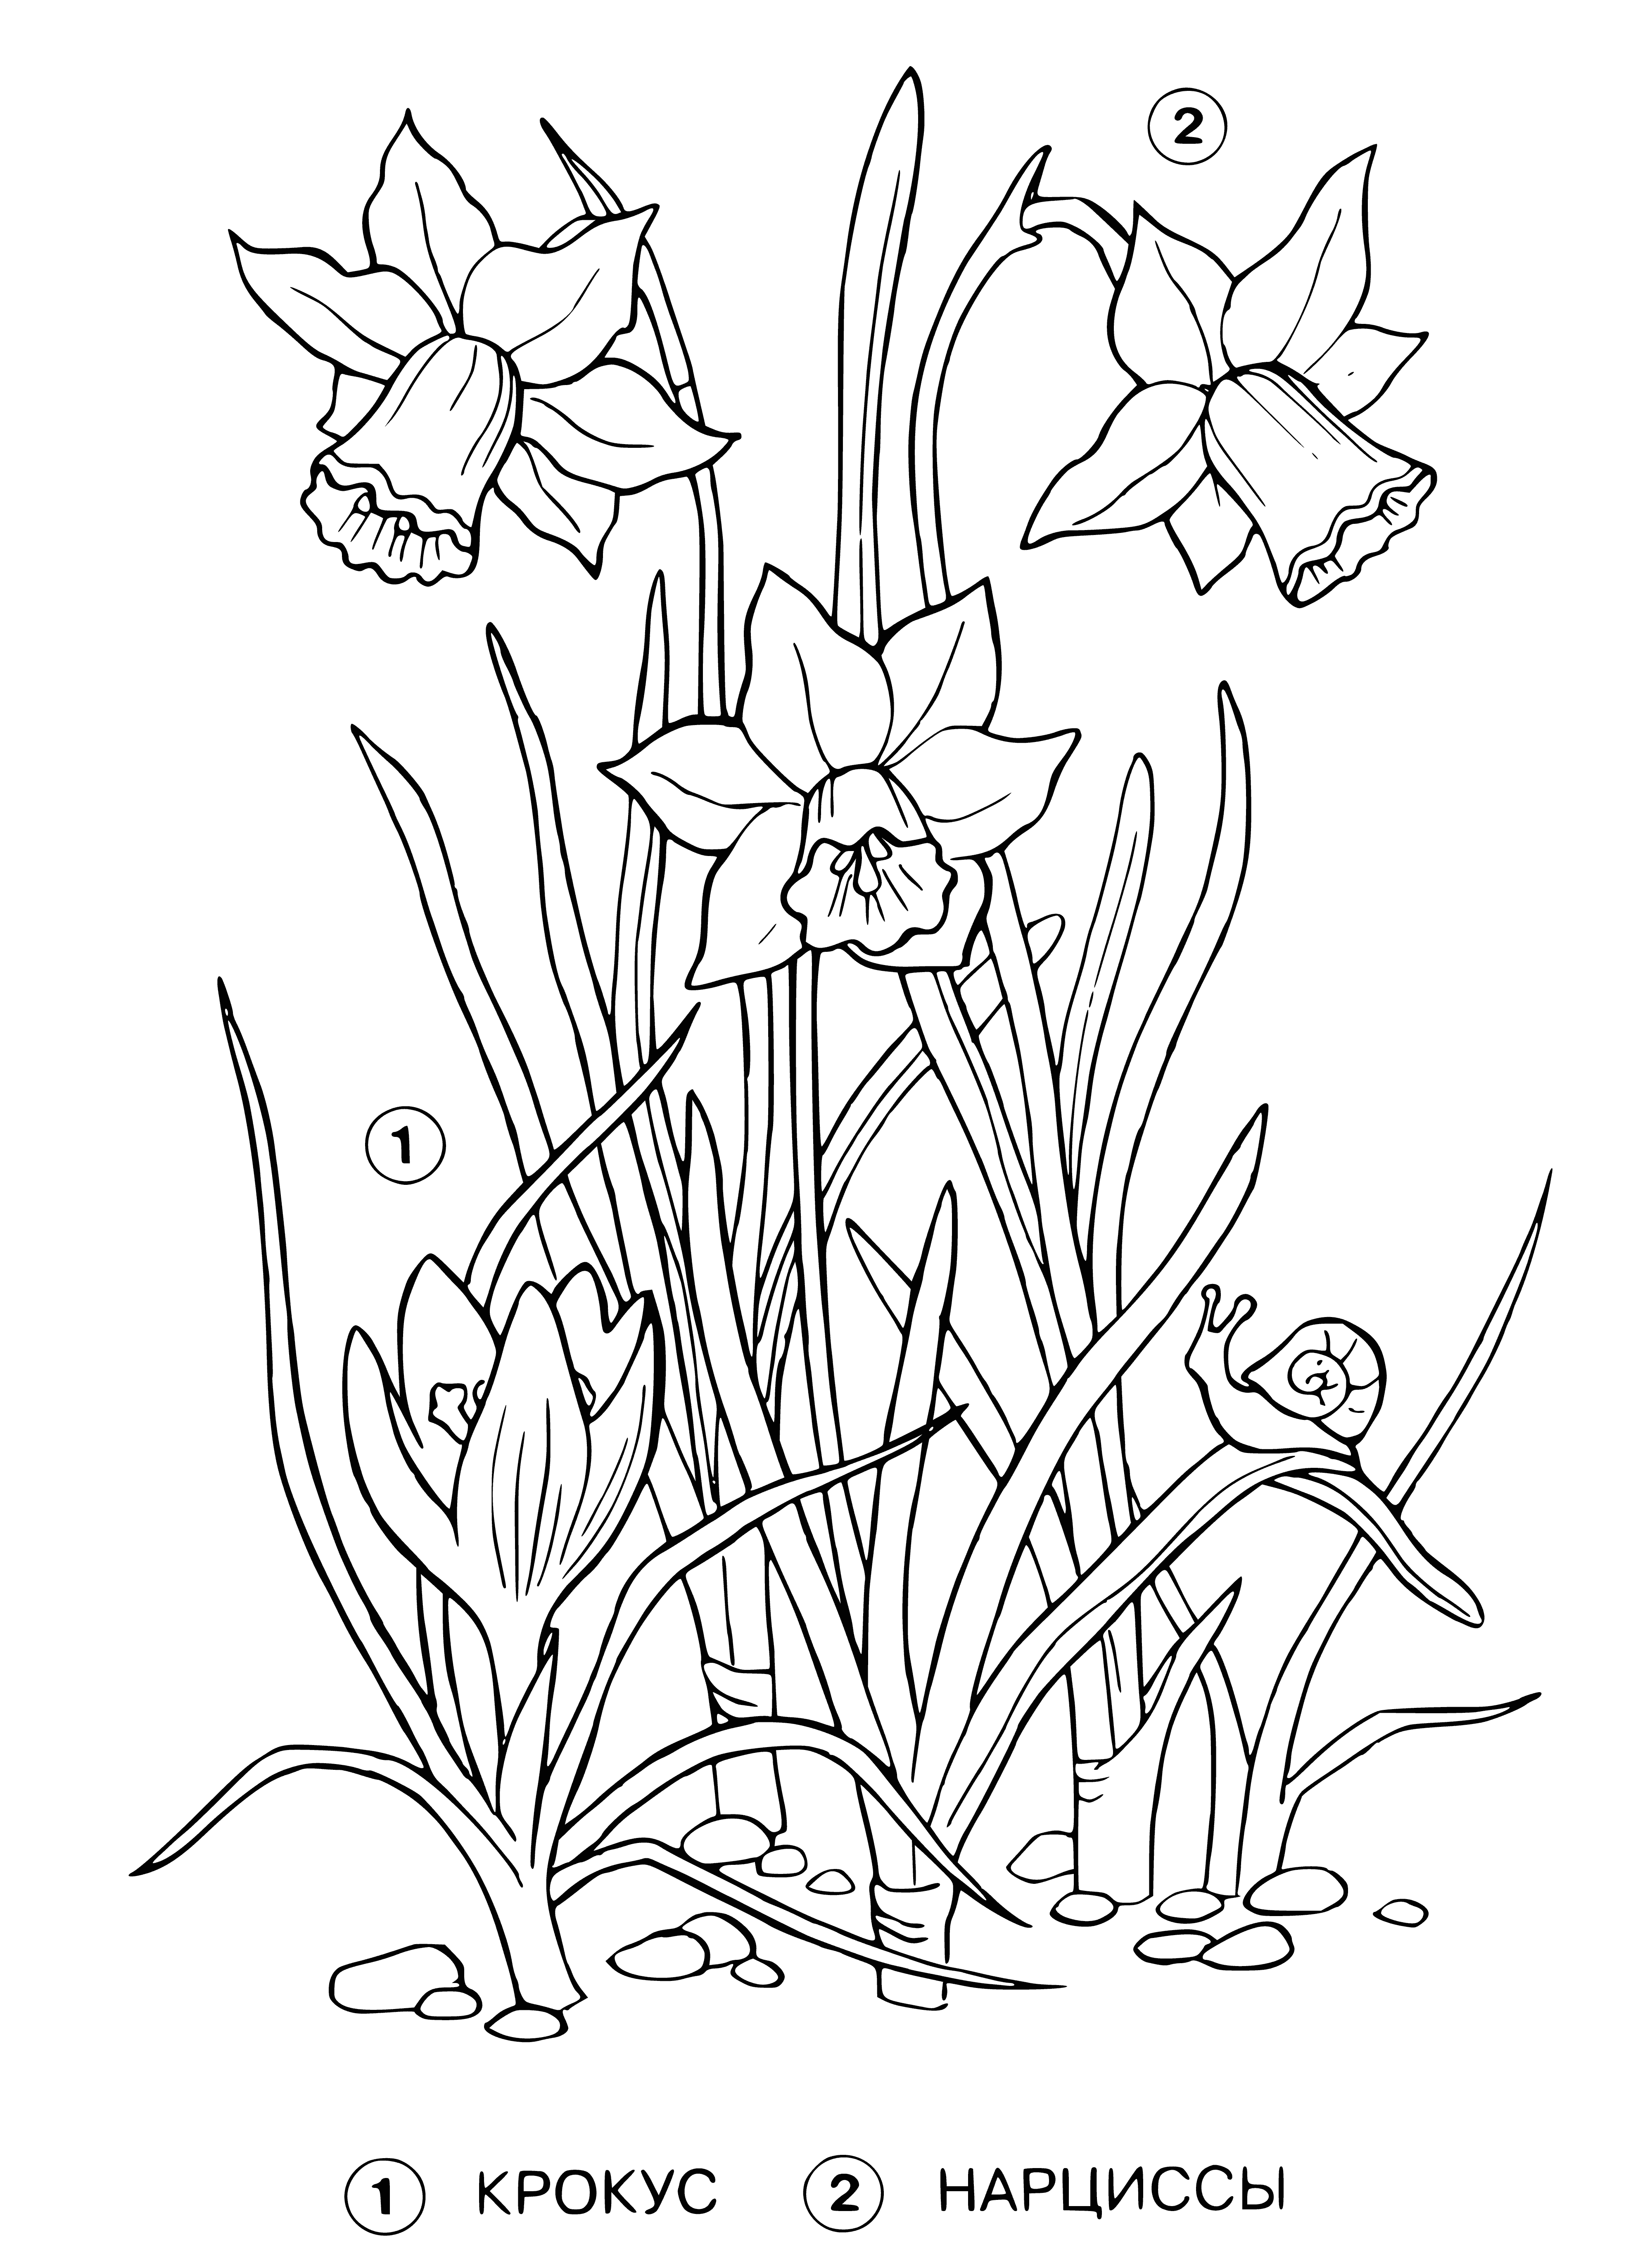 Crocus and daffodil coloring page